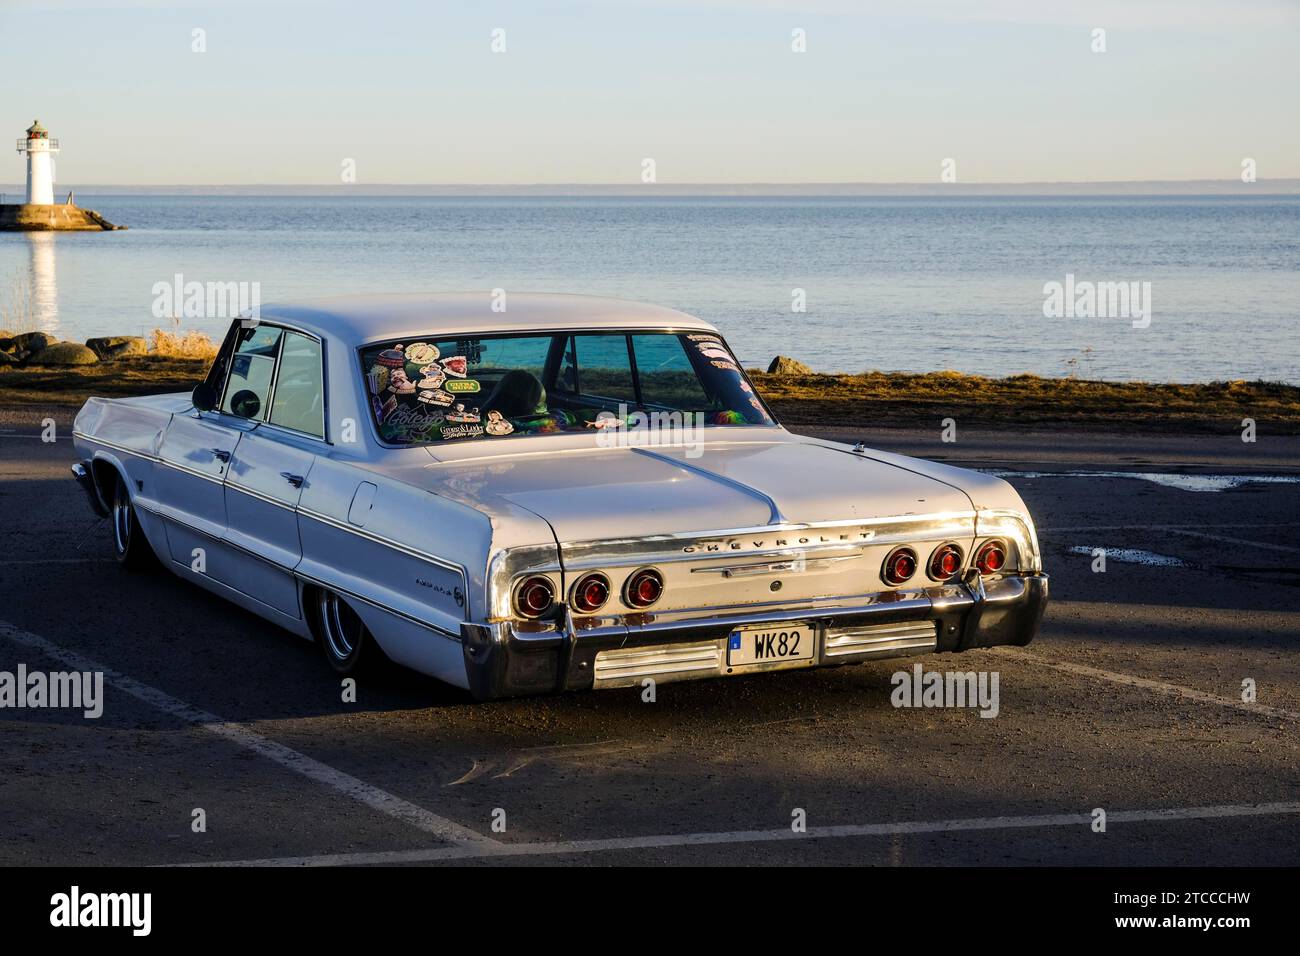 American classic car, Chevrolet Impala from 1964, behind the lake Vaettern and the lighthouse of Hjo, Hjo, Vaestra Goetaland, Sweden Stock Photo